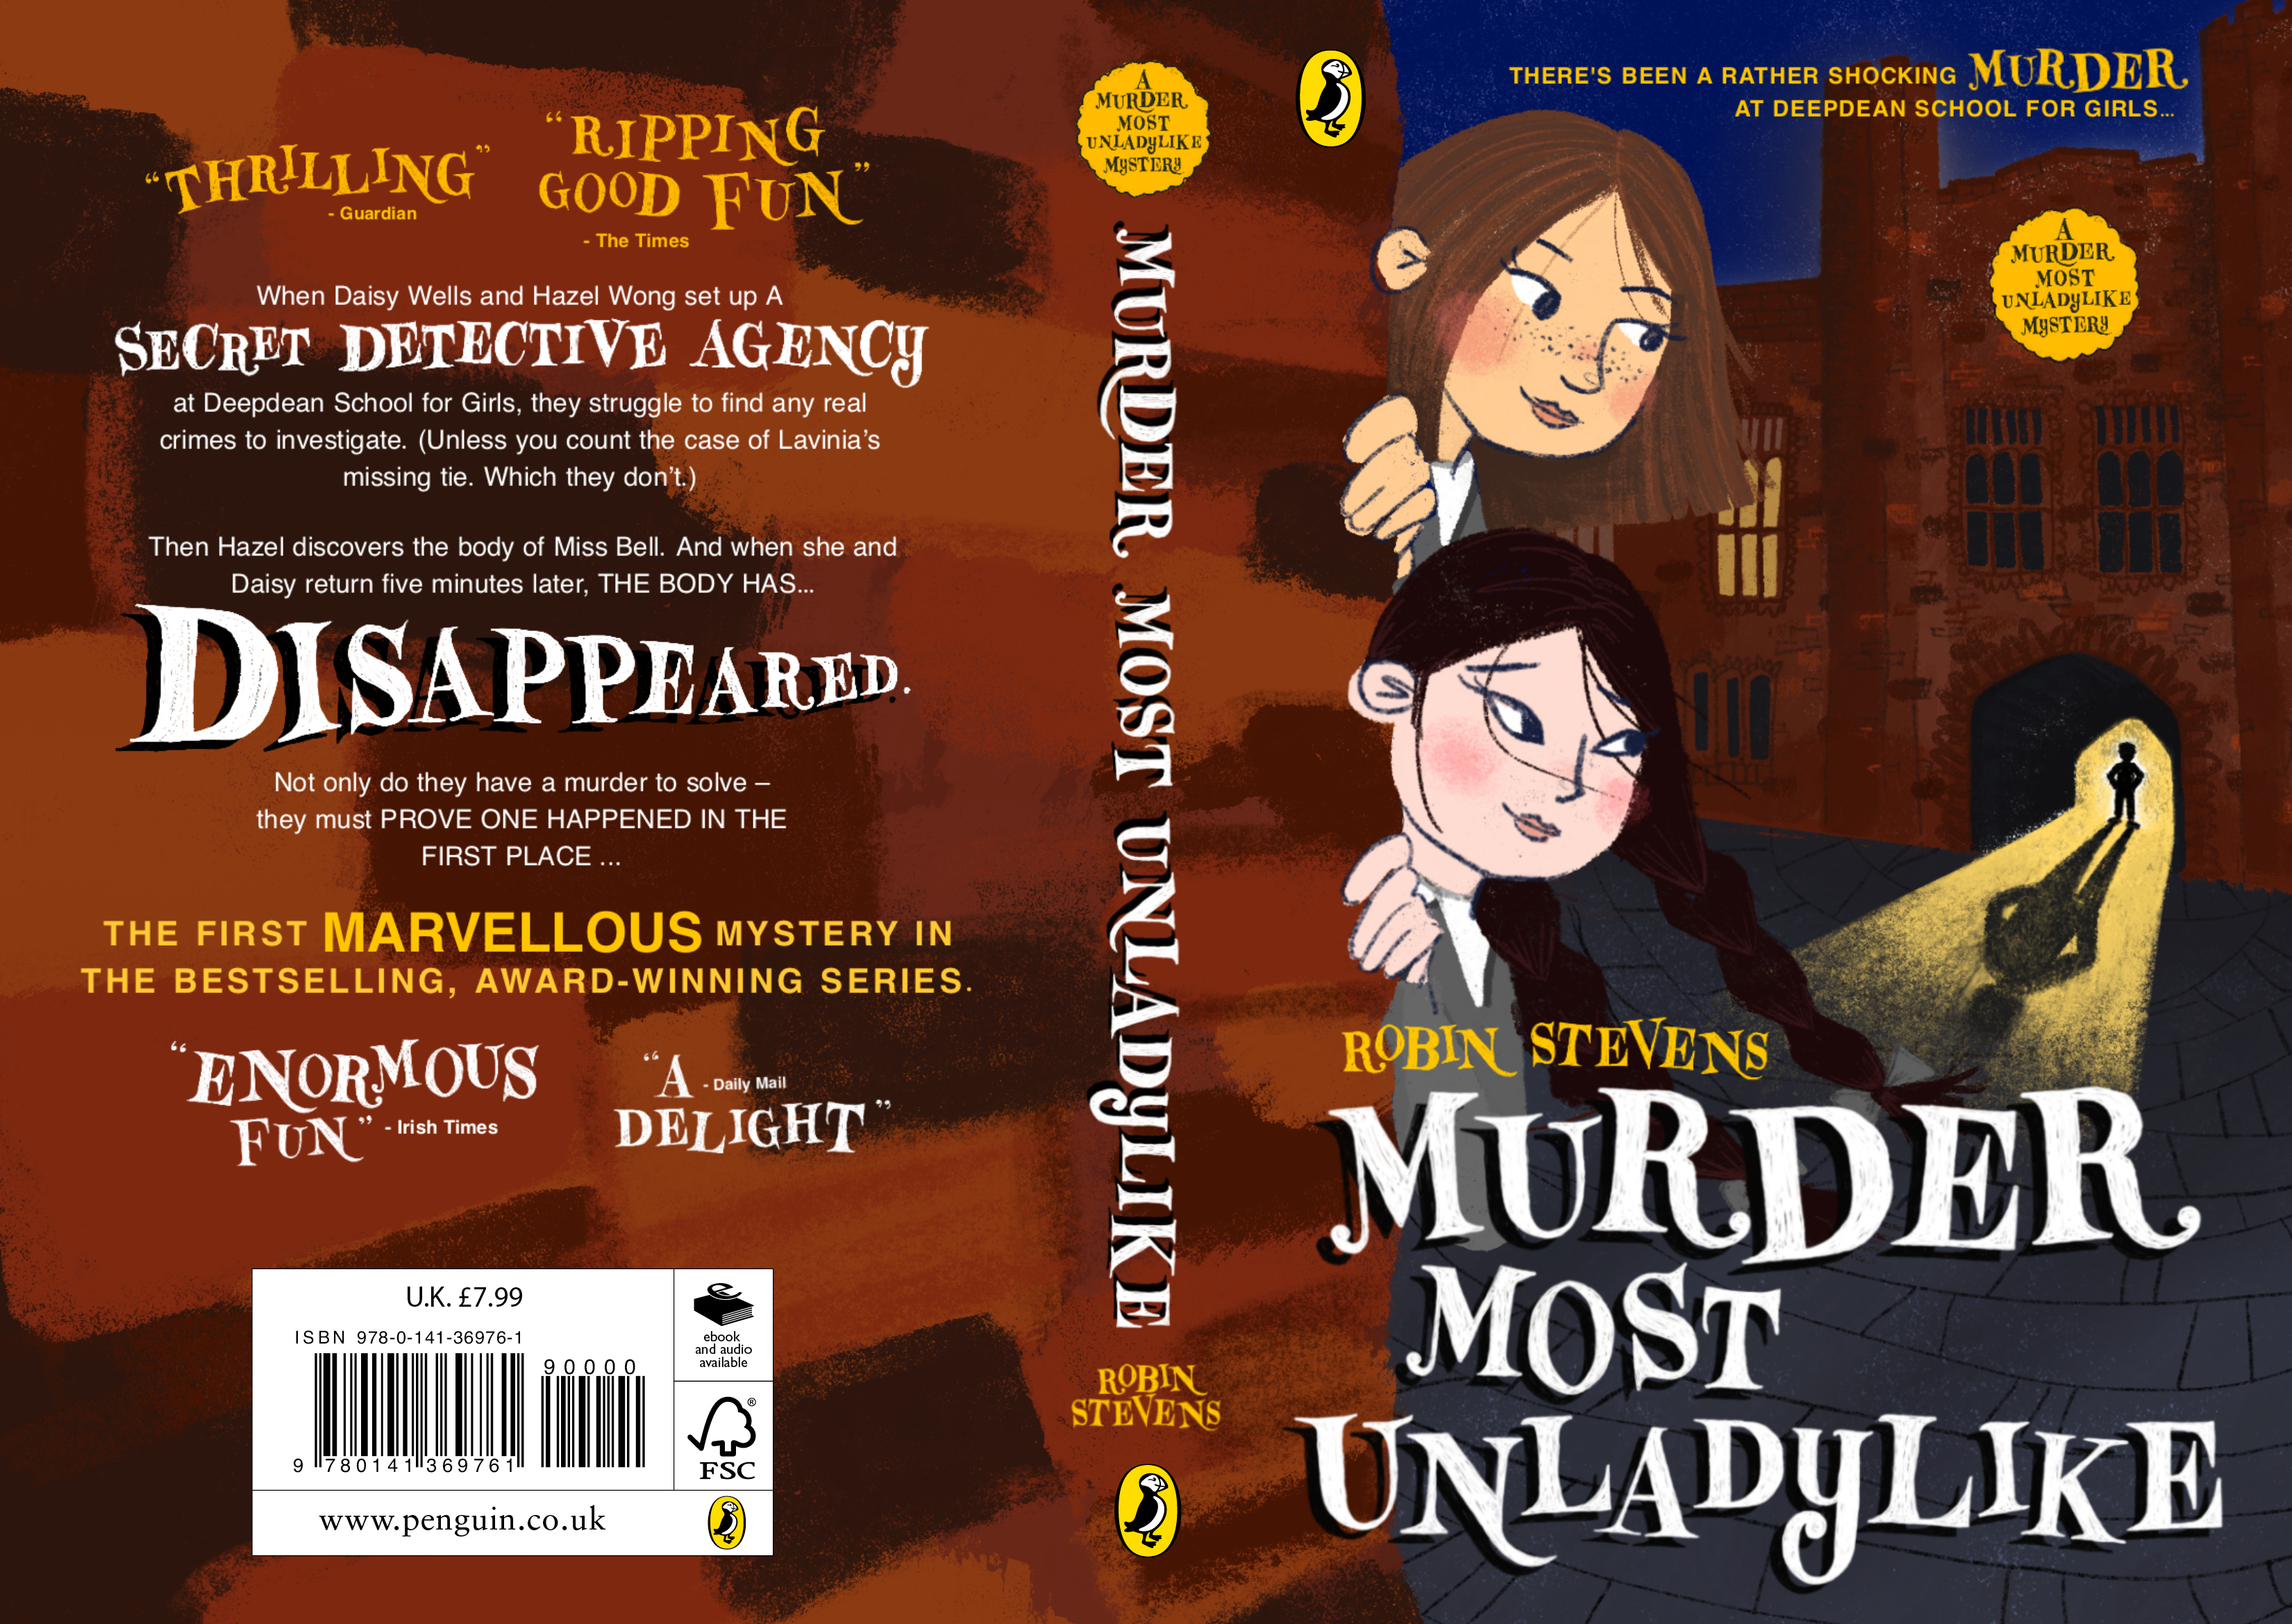 Hannah Barry's cover design of 'Murder Most Unladylike'